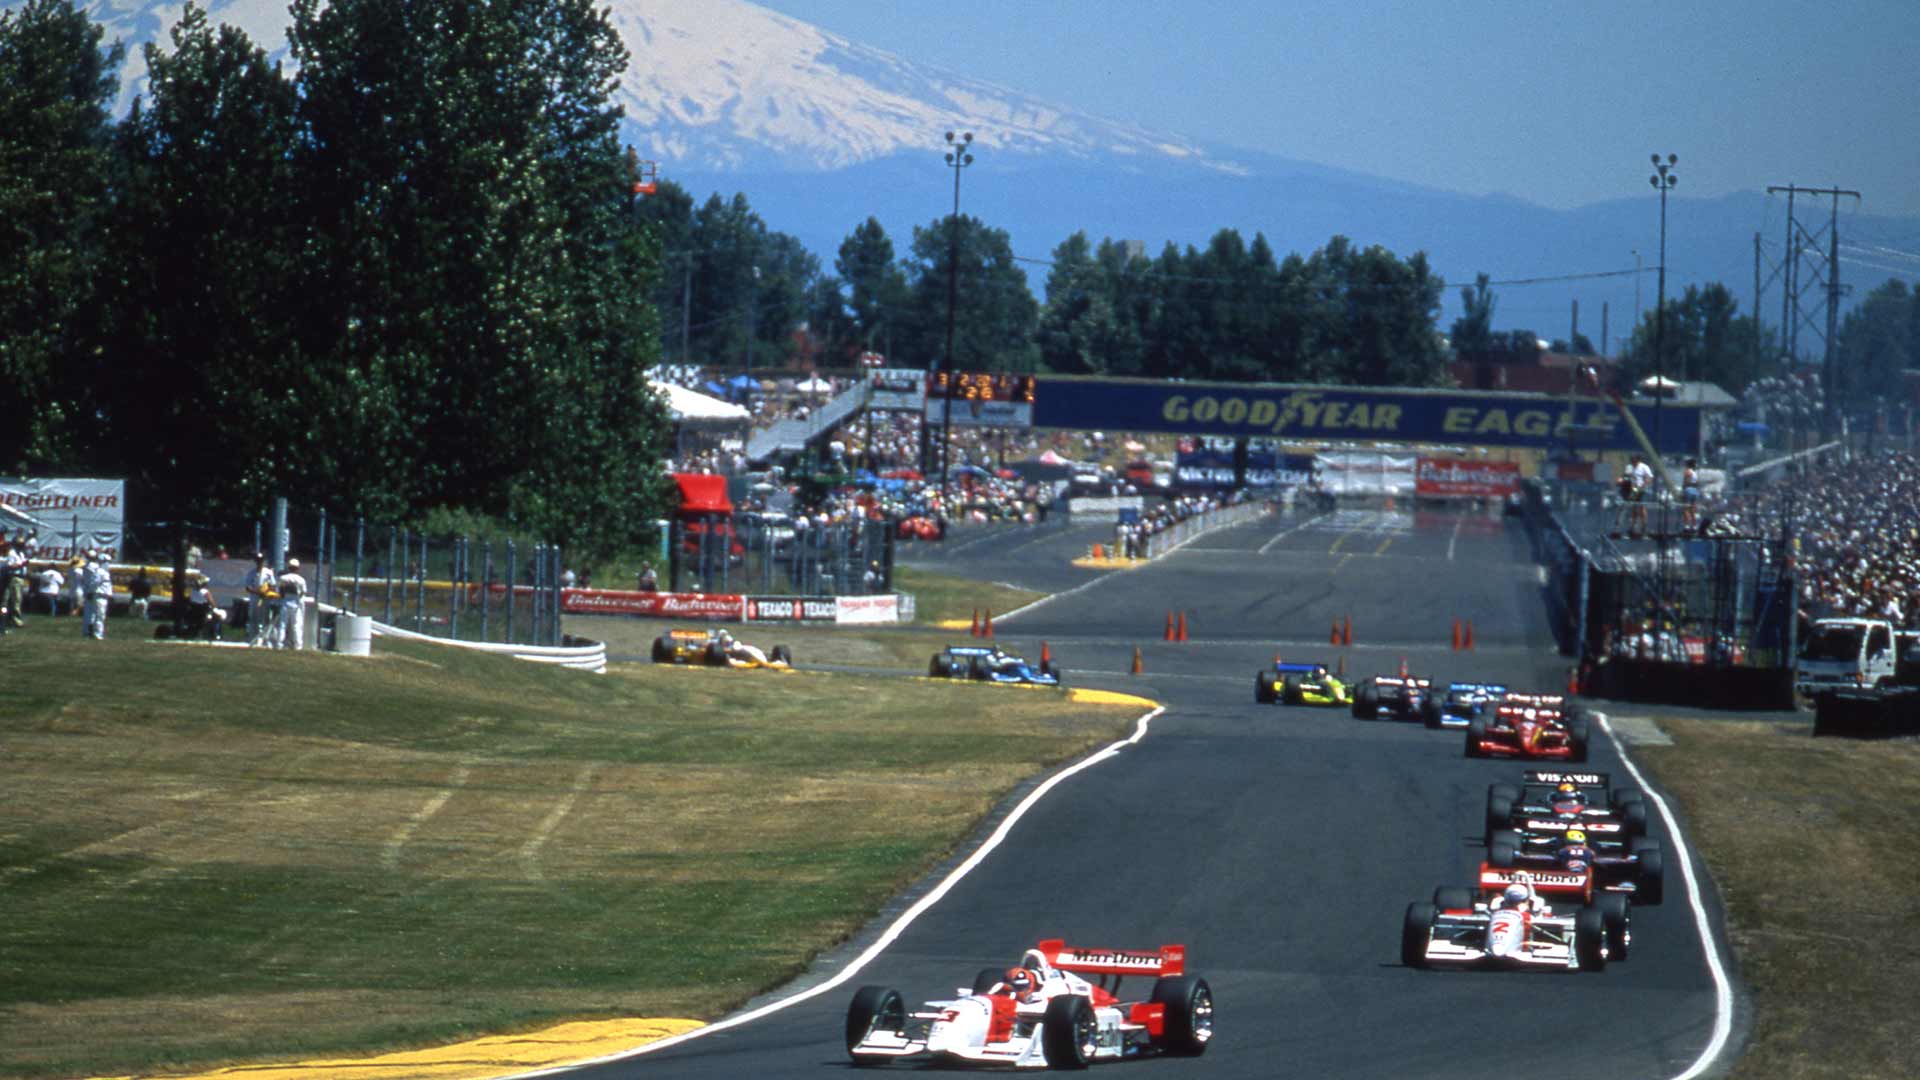 A throwback to the Grand Prix of Portland from 2000